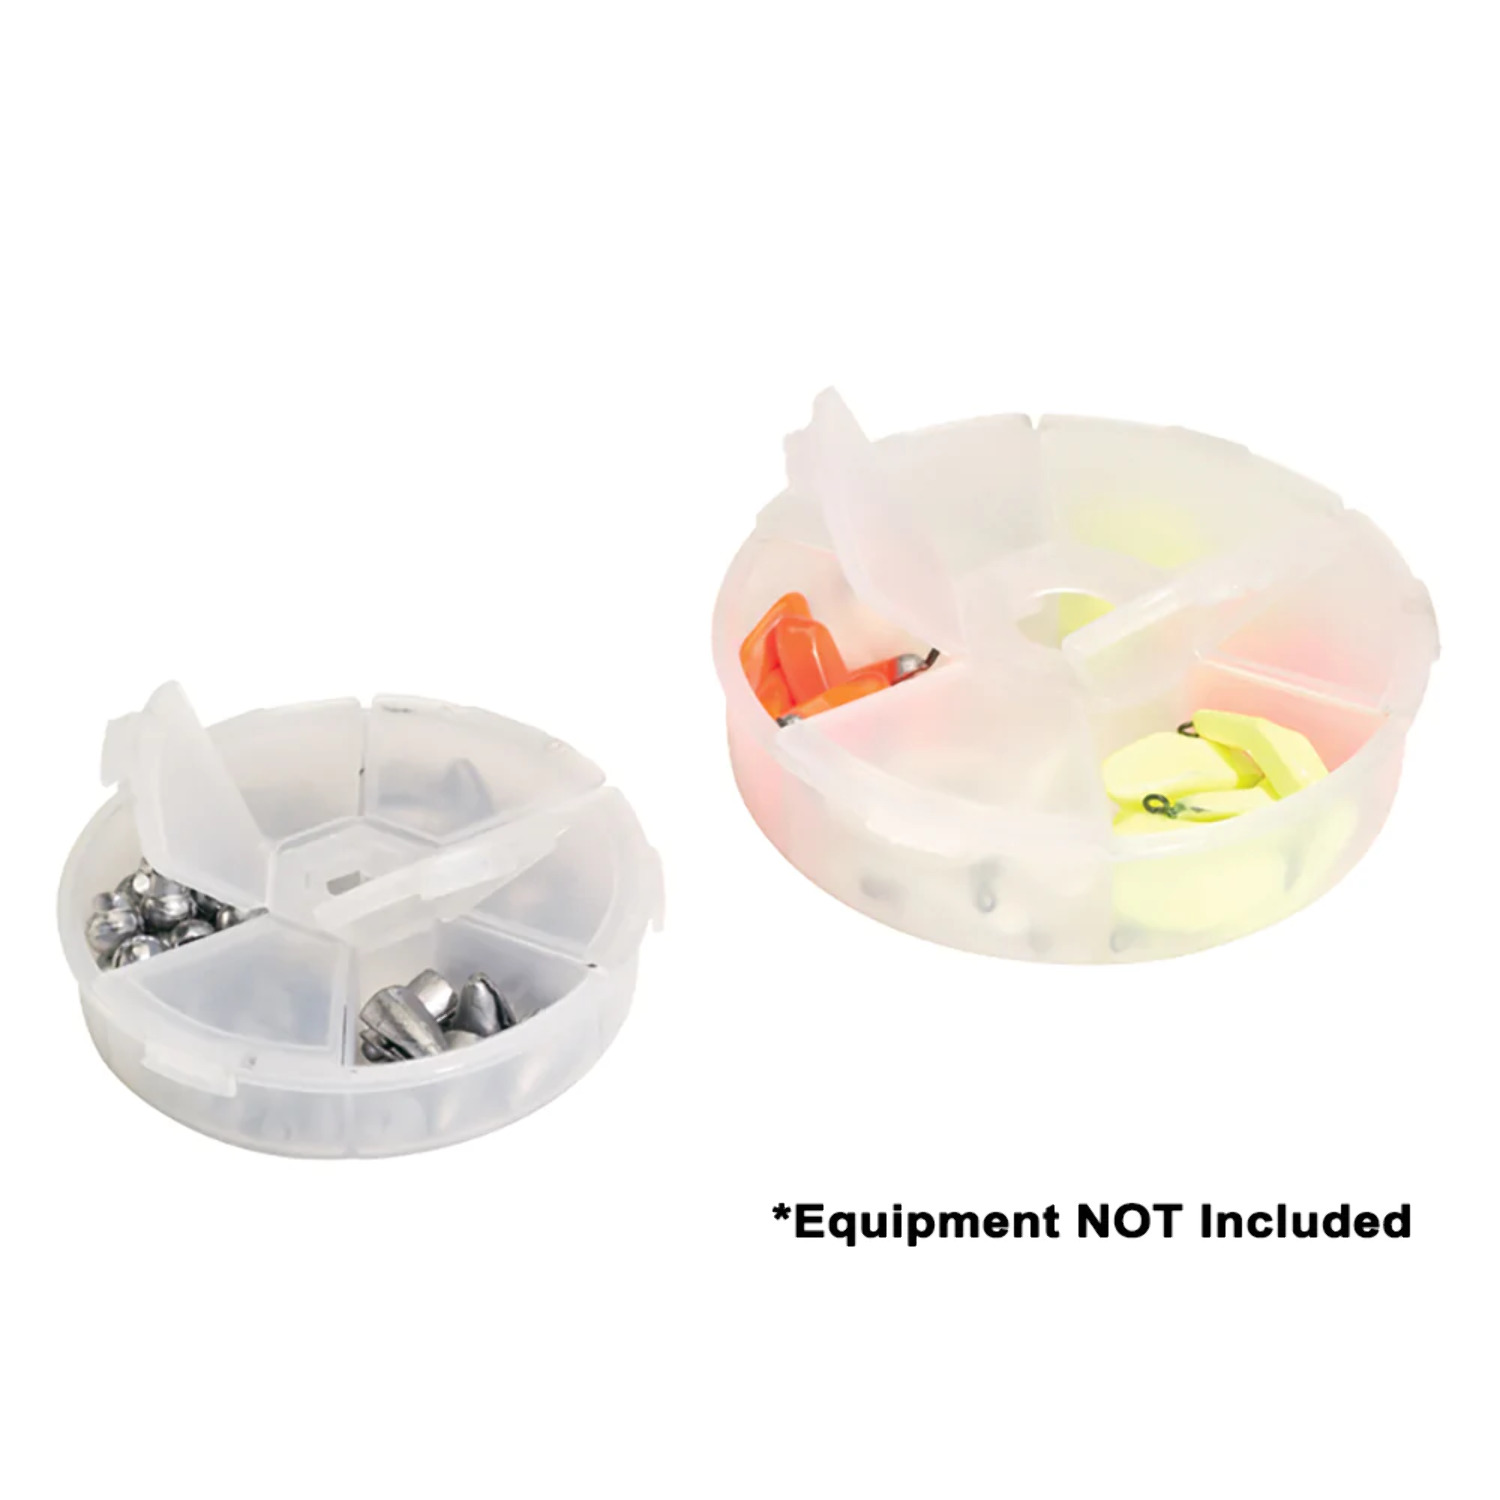 Plano Round Terminal Organizer - Clear [104100] - image 1 of 1